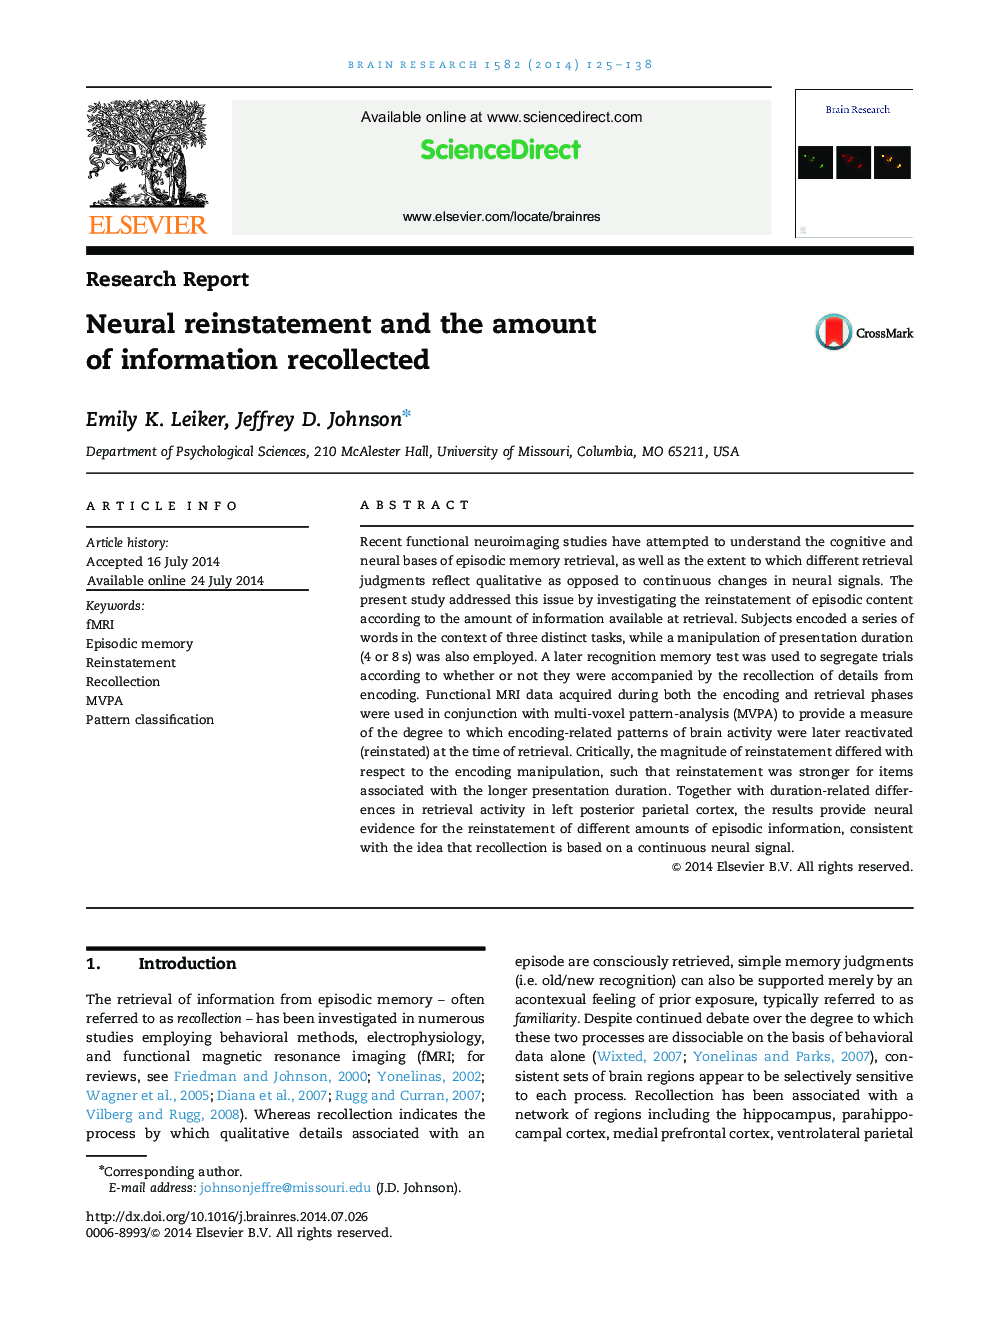 Neural reinstatement and the amount of information recollected